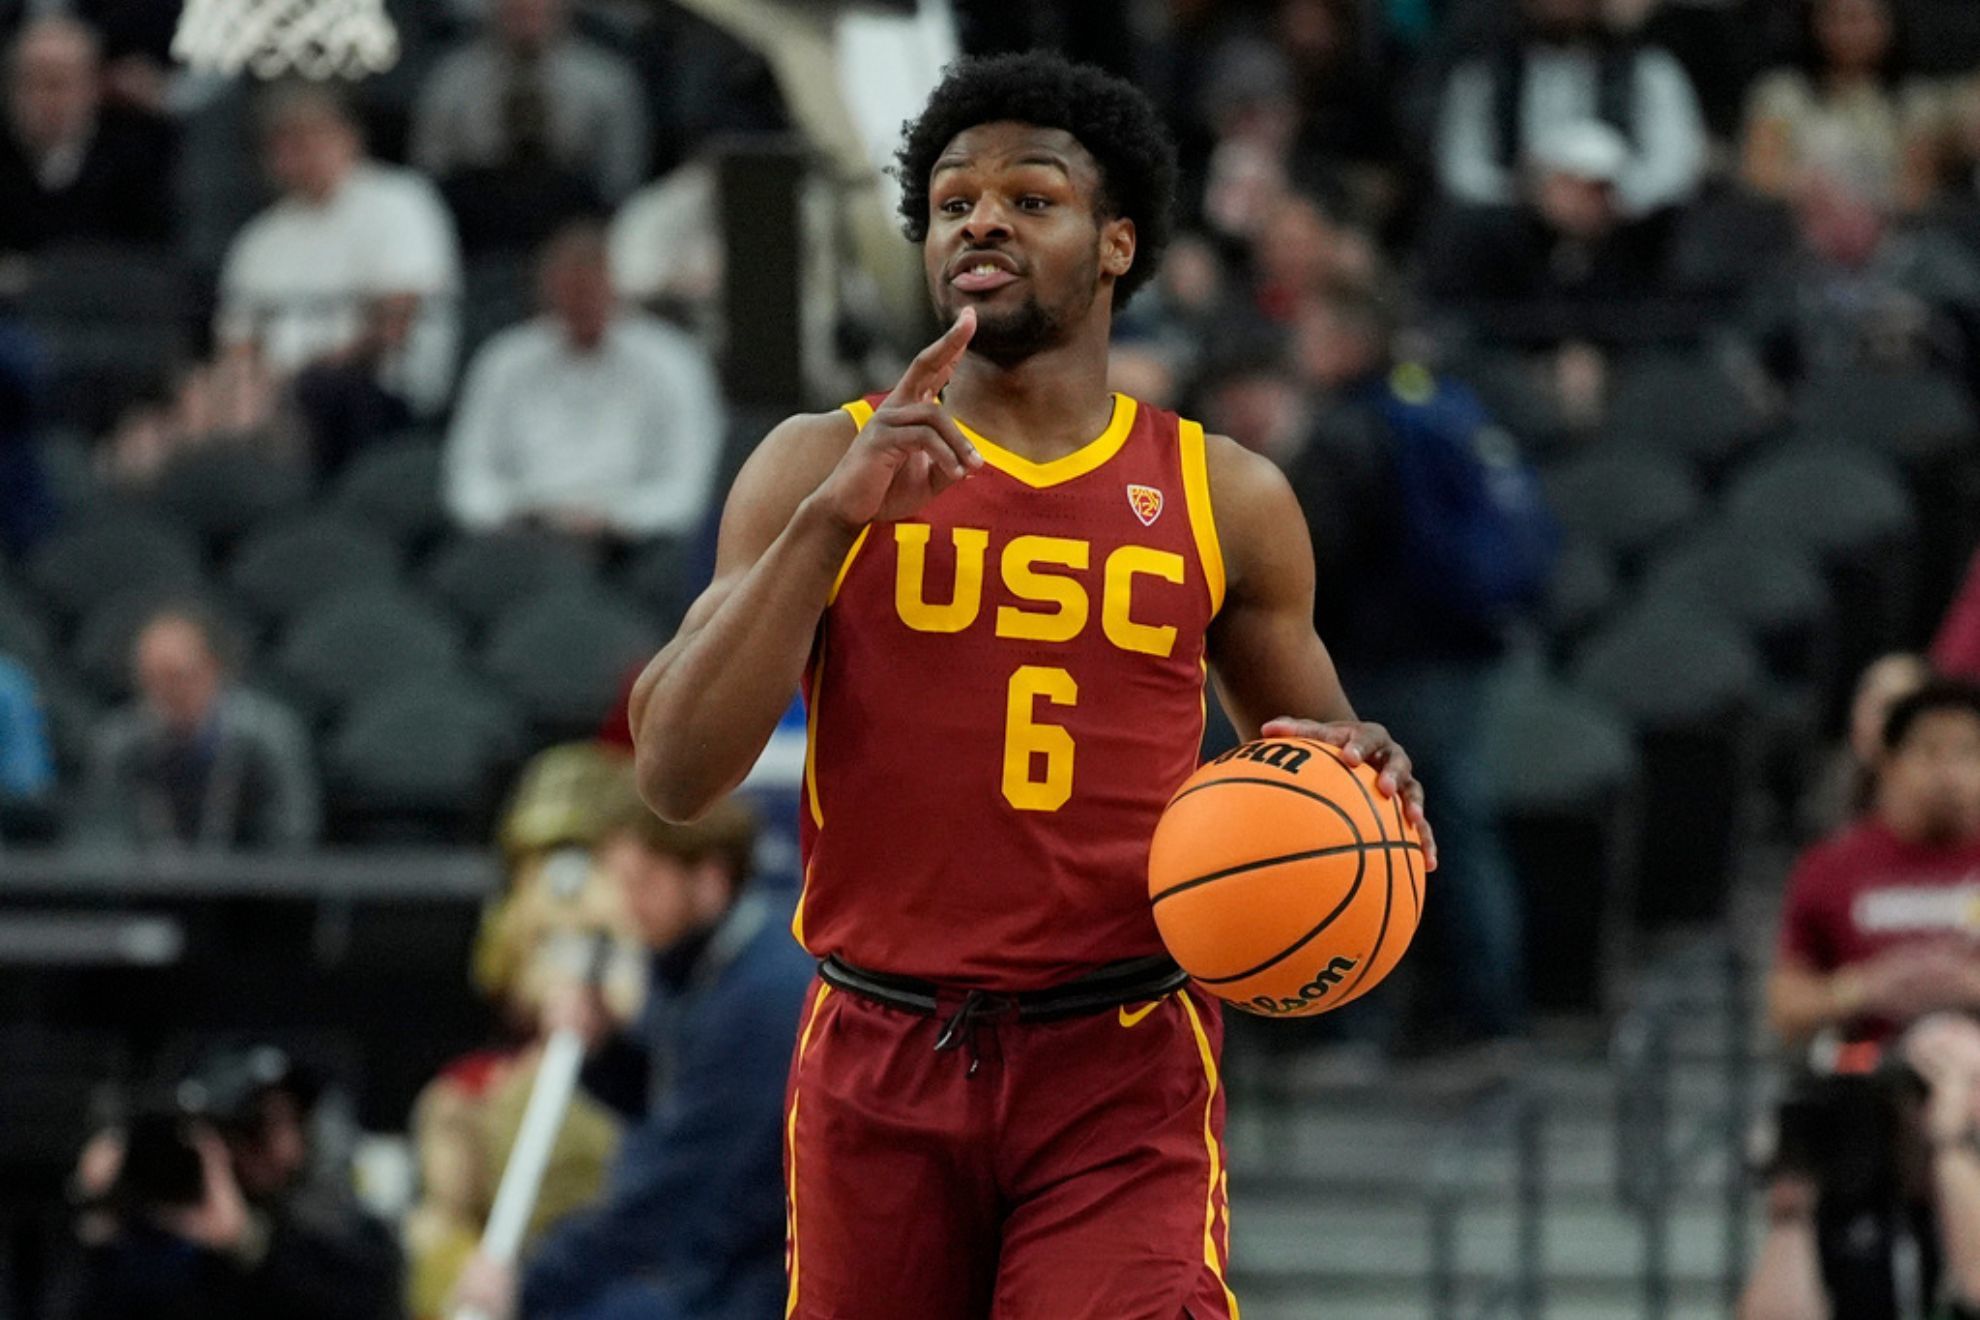 Bronny James will most likely stay another year at USC to raise his draft stock